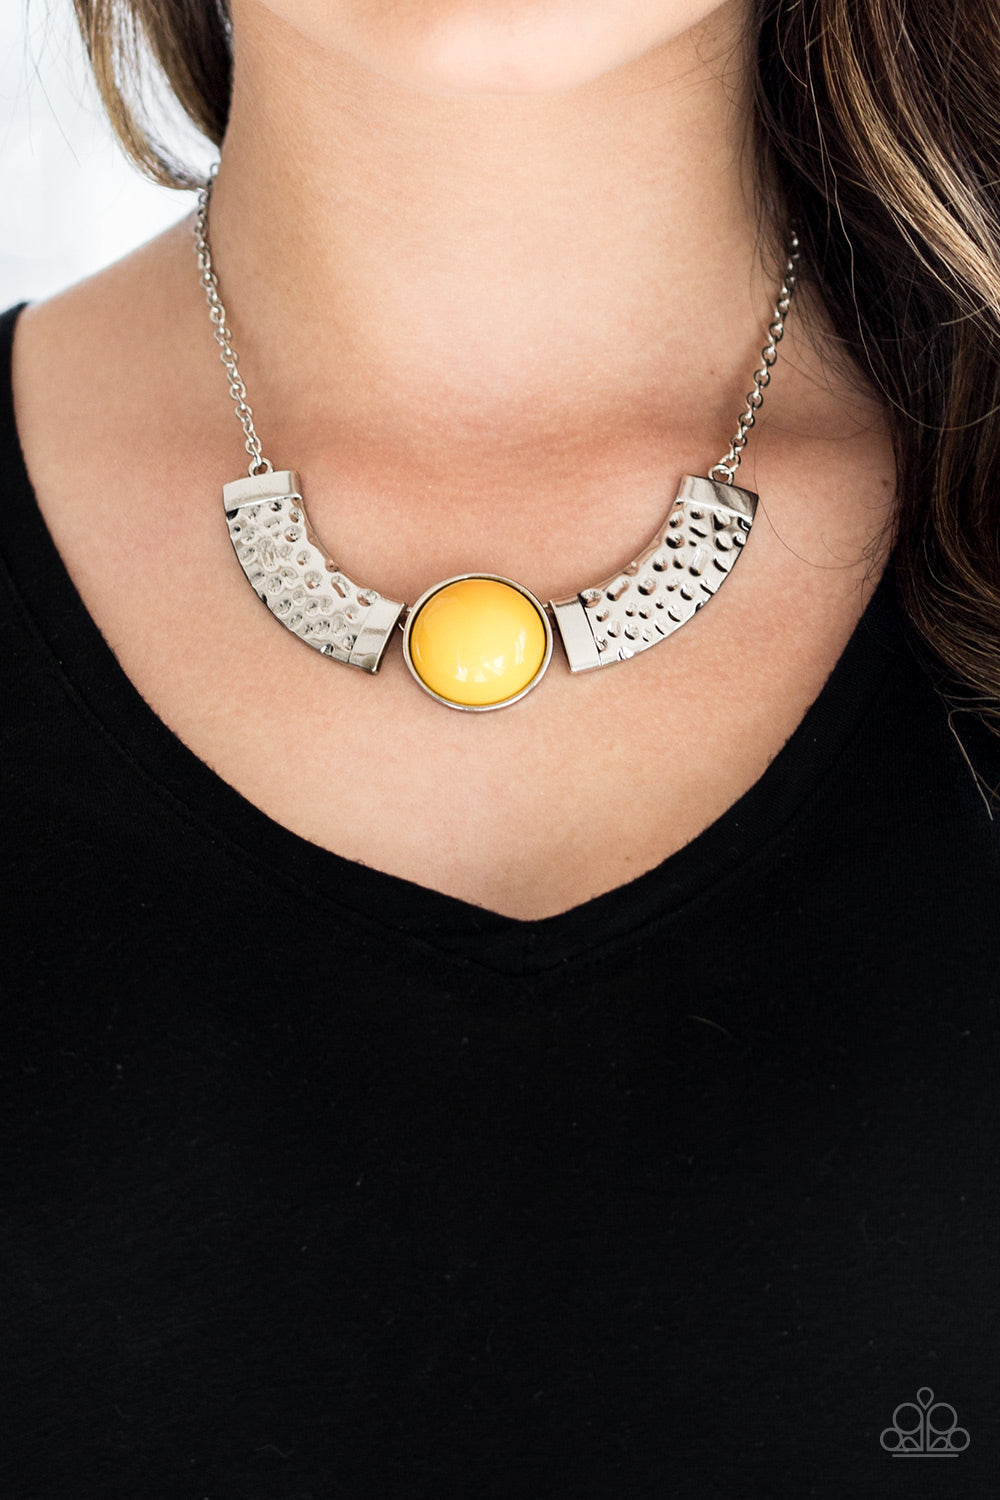 Egyptian Spell - Yellow and Silver Necklace - Paparazzi Accessories - Dramatic silver plates connect with a shiny yellow beaded center, creating an indigenous collar-like pendant. The shiny silver plates are delicately hammered, adding a flashy metallic texture to the tribal inspired palette. Features an adjustable clasp closure. 